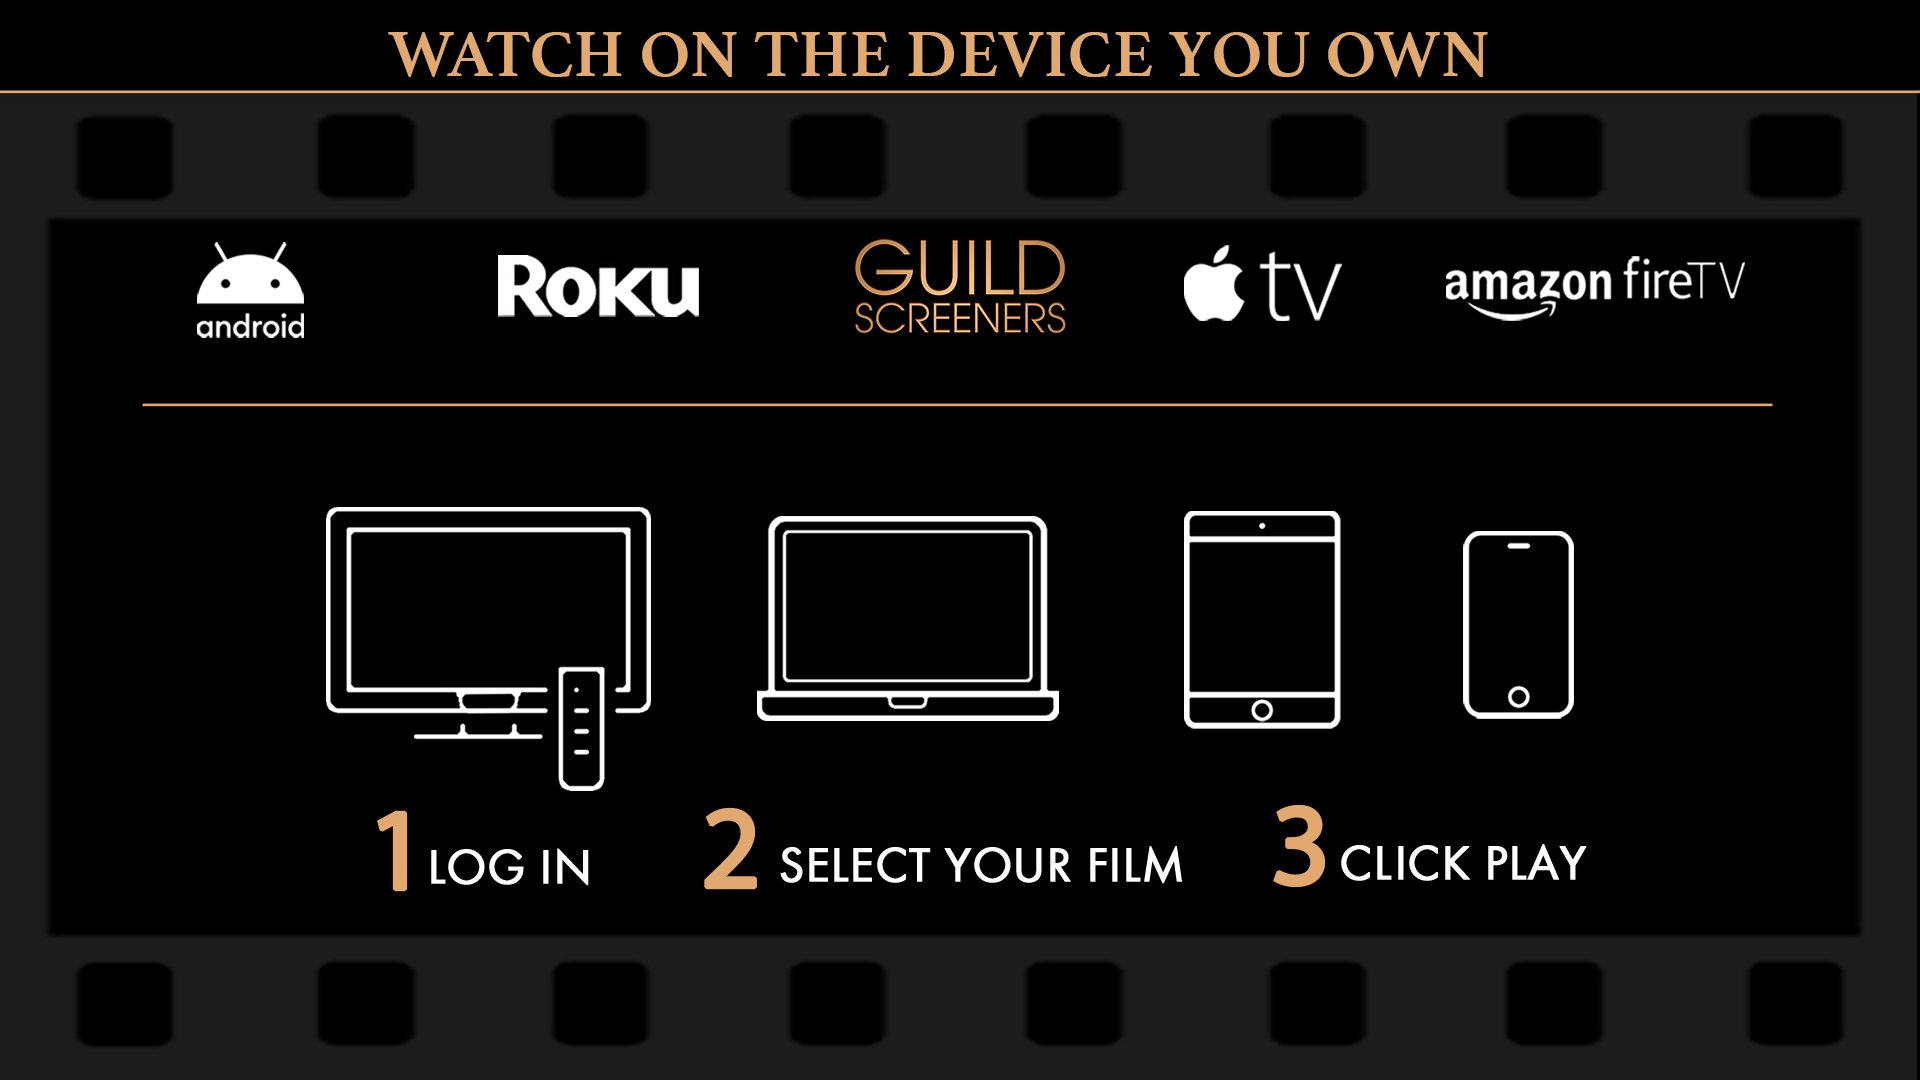 Watching films and TV series on Guild Screeners is easy! Access Guild Screeners on the device you already own: Roku, Apple TV, Amazon Fire TV, Android TV, iOS Mobile, Android Mobile, or via your computer or mobile device web browser. Step 1: Enter your Guild supplied PIN on the device you're watching. Step 2: Select the film or episode you wish to watch. Step 3: Click PLAY. 